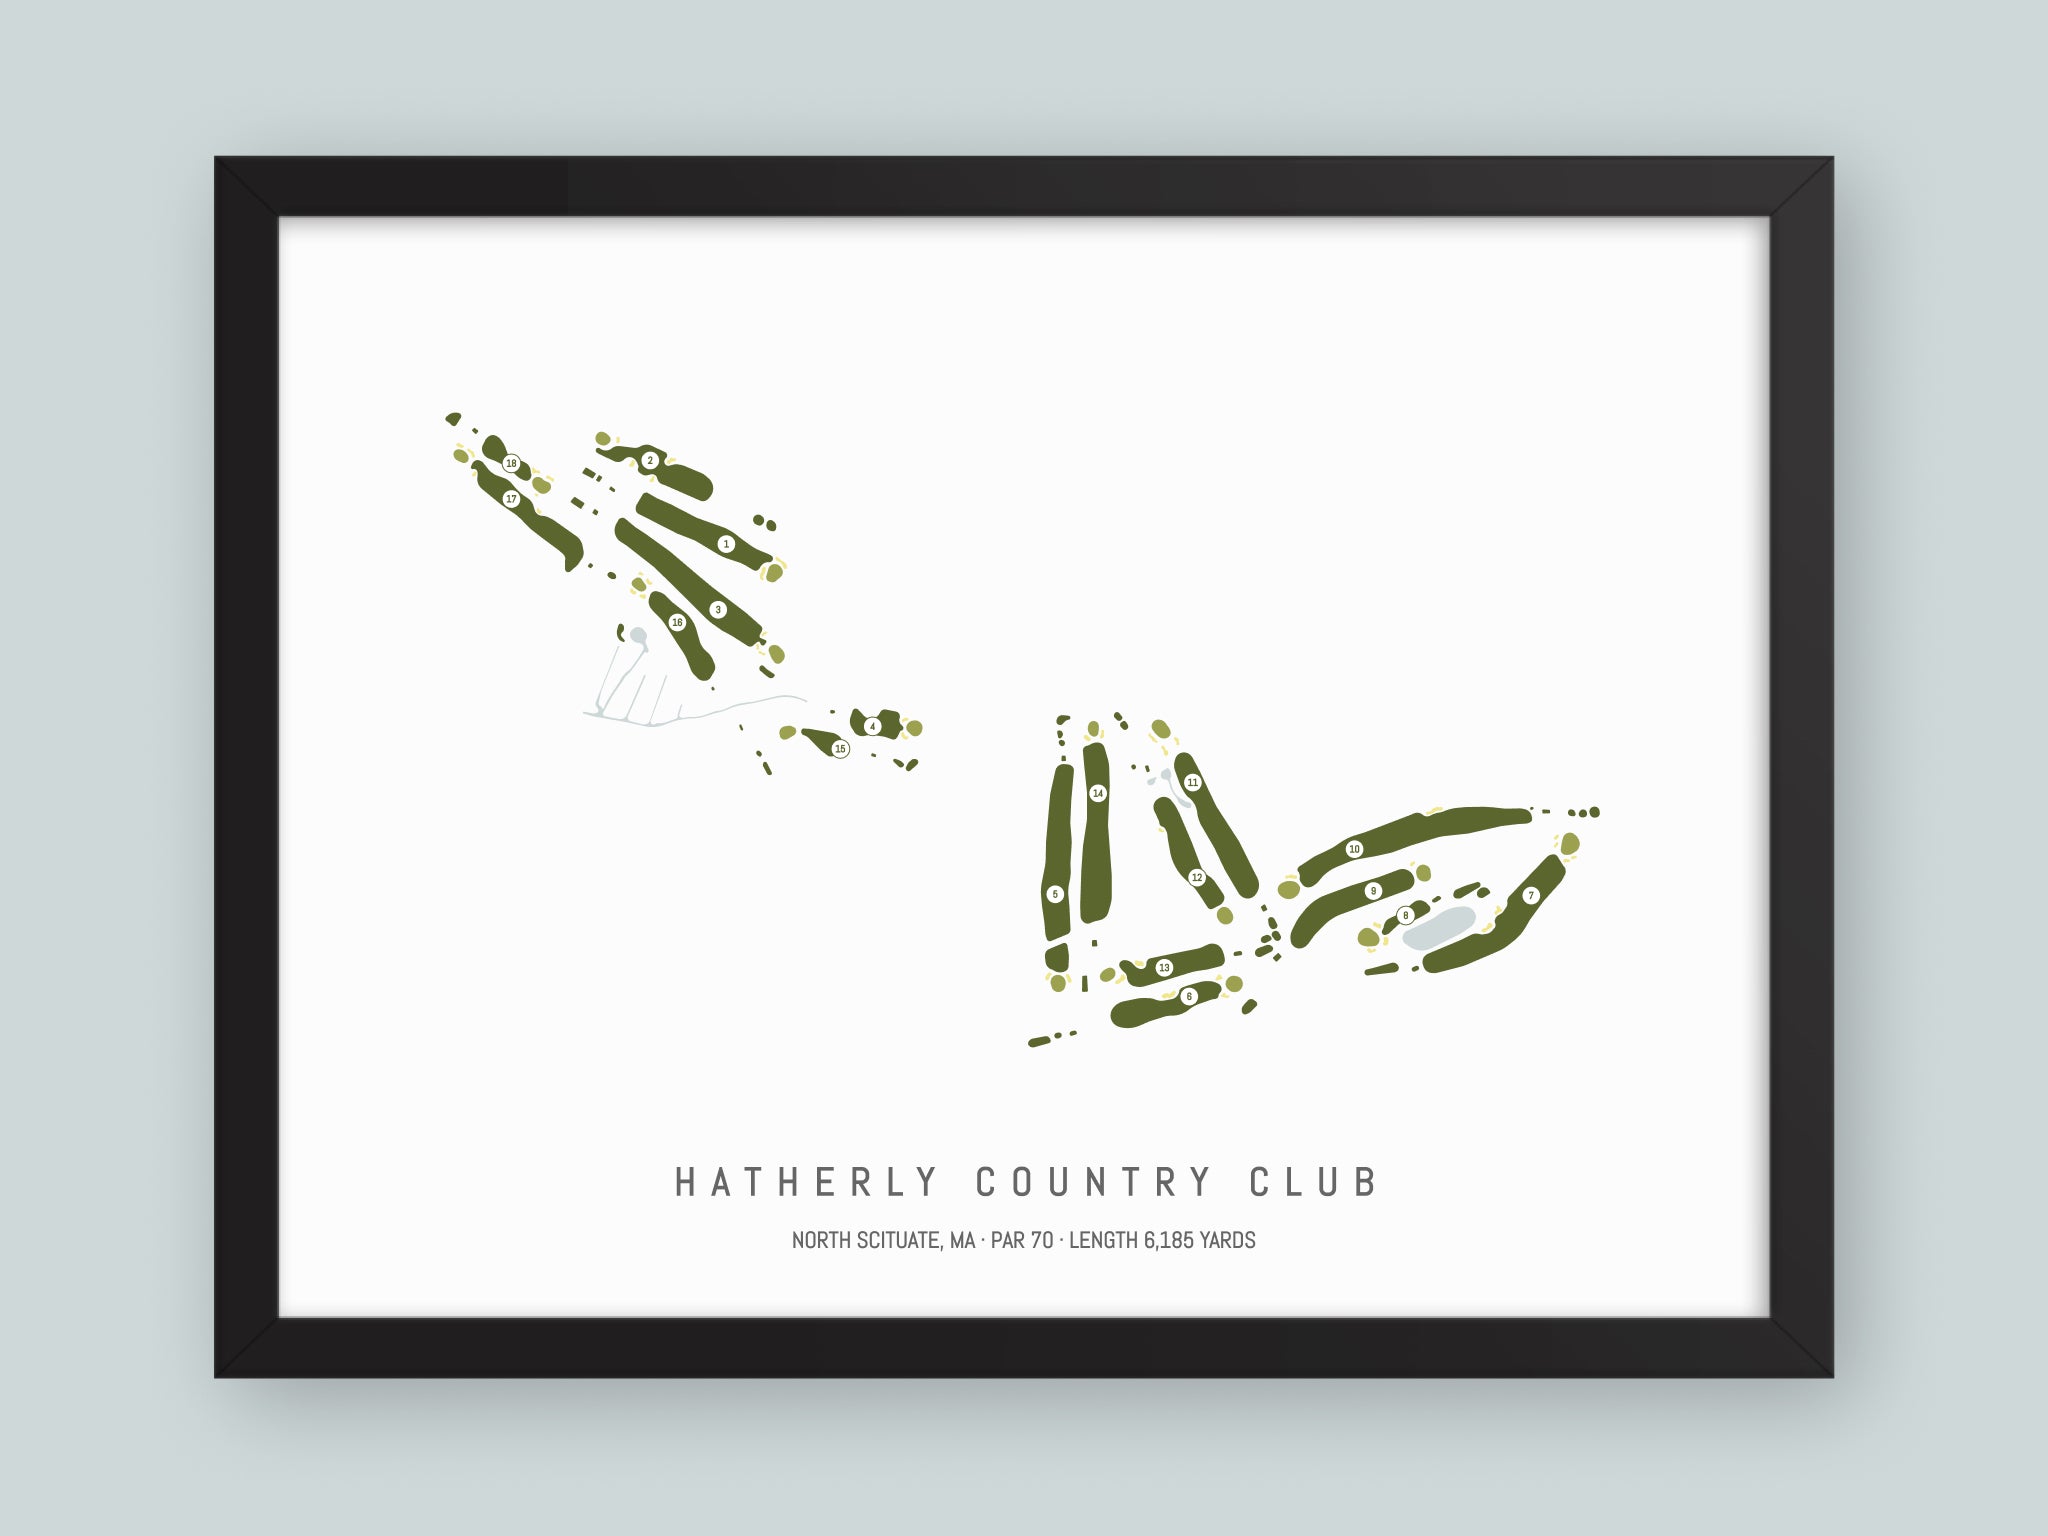 Hatherly-Country-Club-MA--Black-Frame-24x18-With-Hole-Numbers